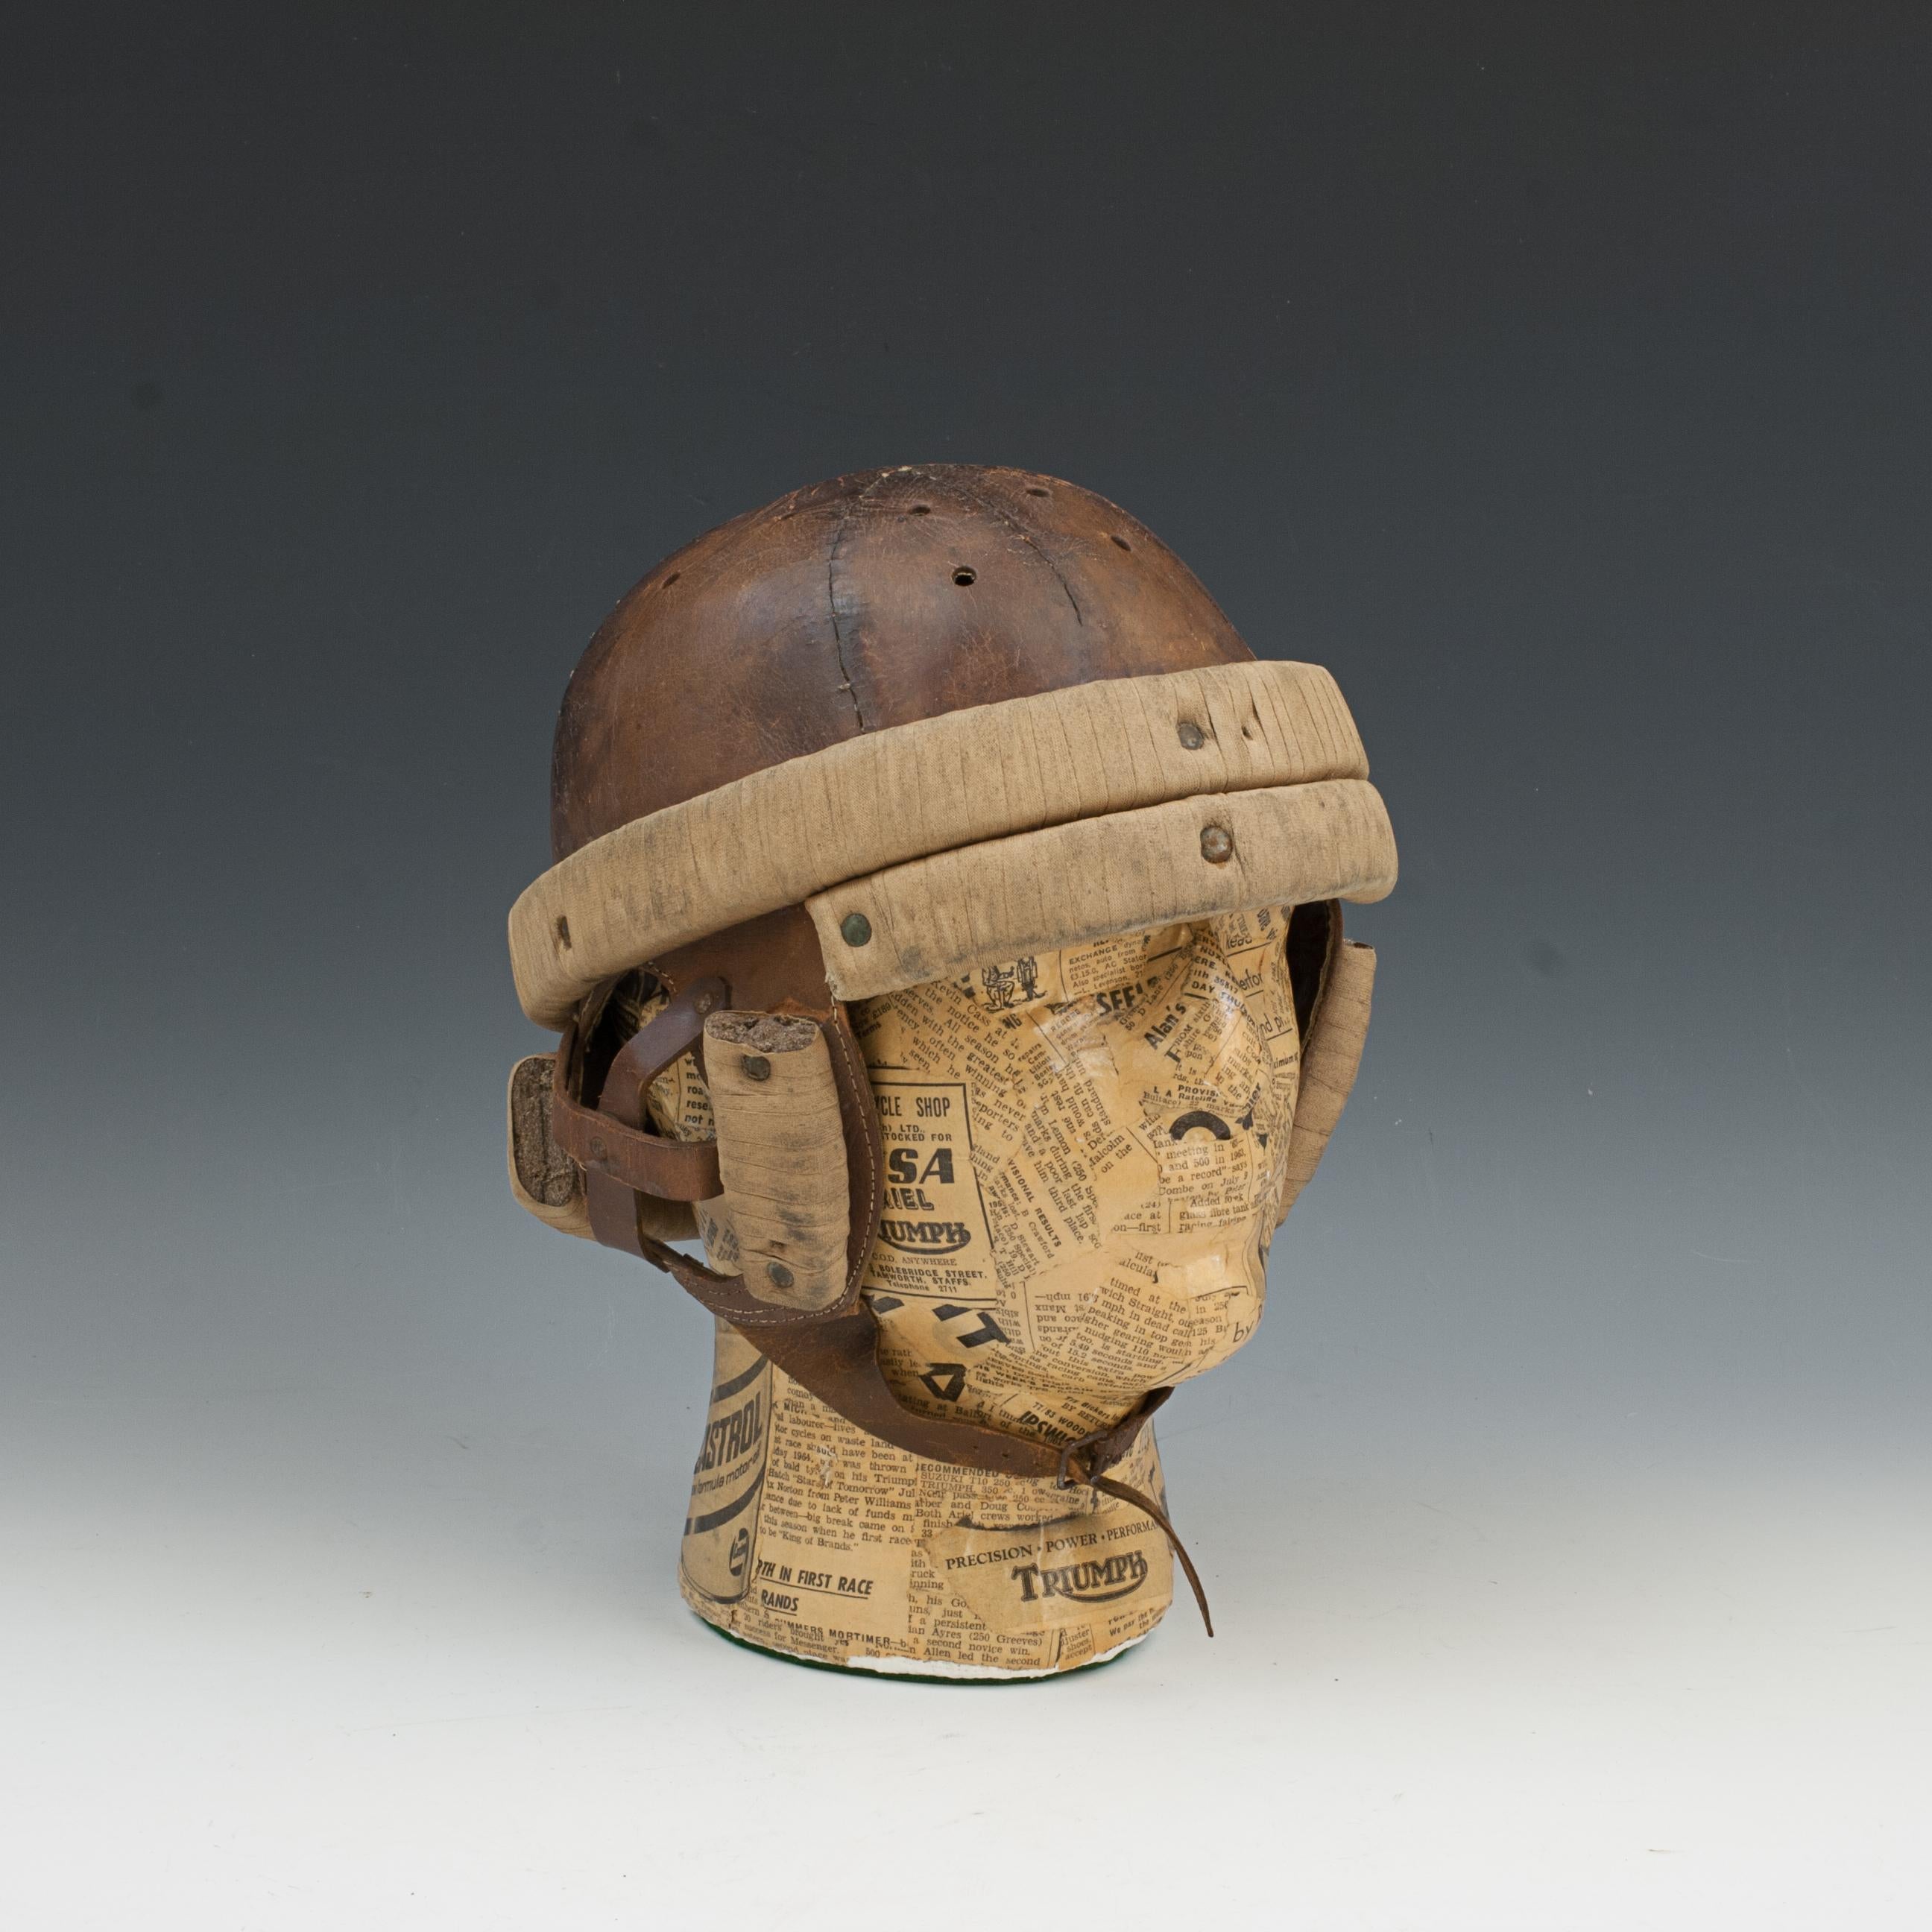 Unusual Leather Helmet.
A very unusual leather helmet with padded protection. The hard leather shell is stitched together and has ventilation holes in the top. There is padded protection bars, one all around the circumference, a small one for the